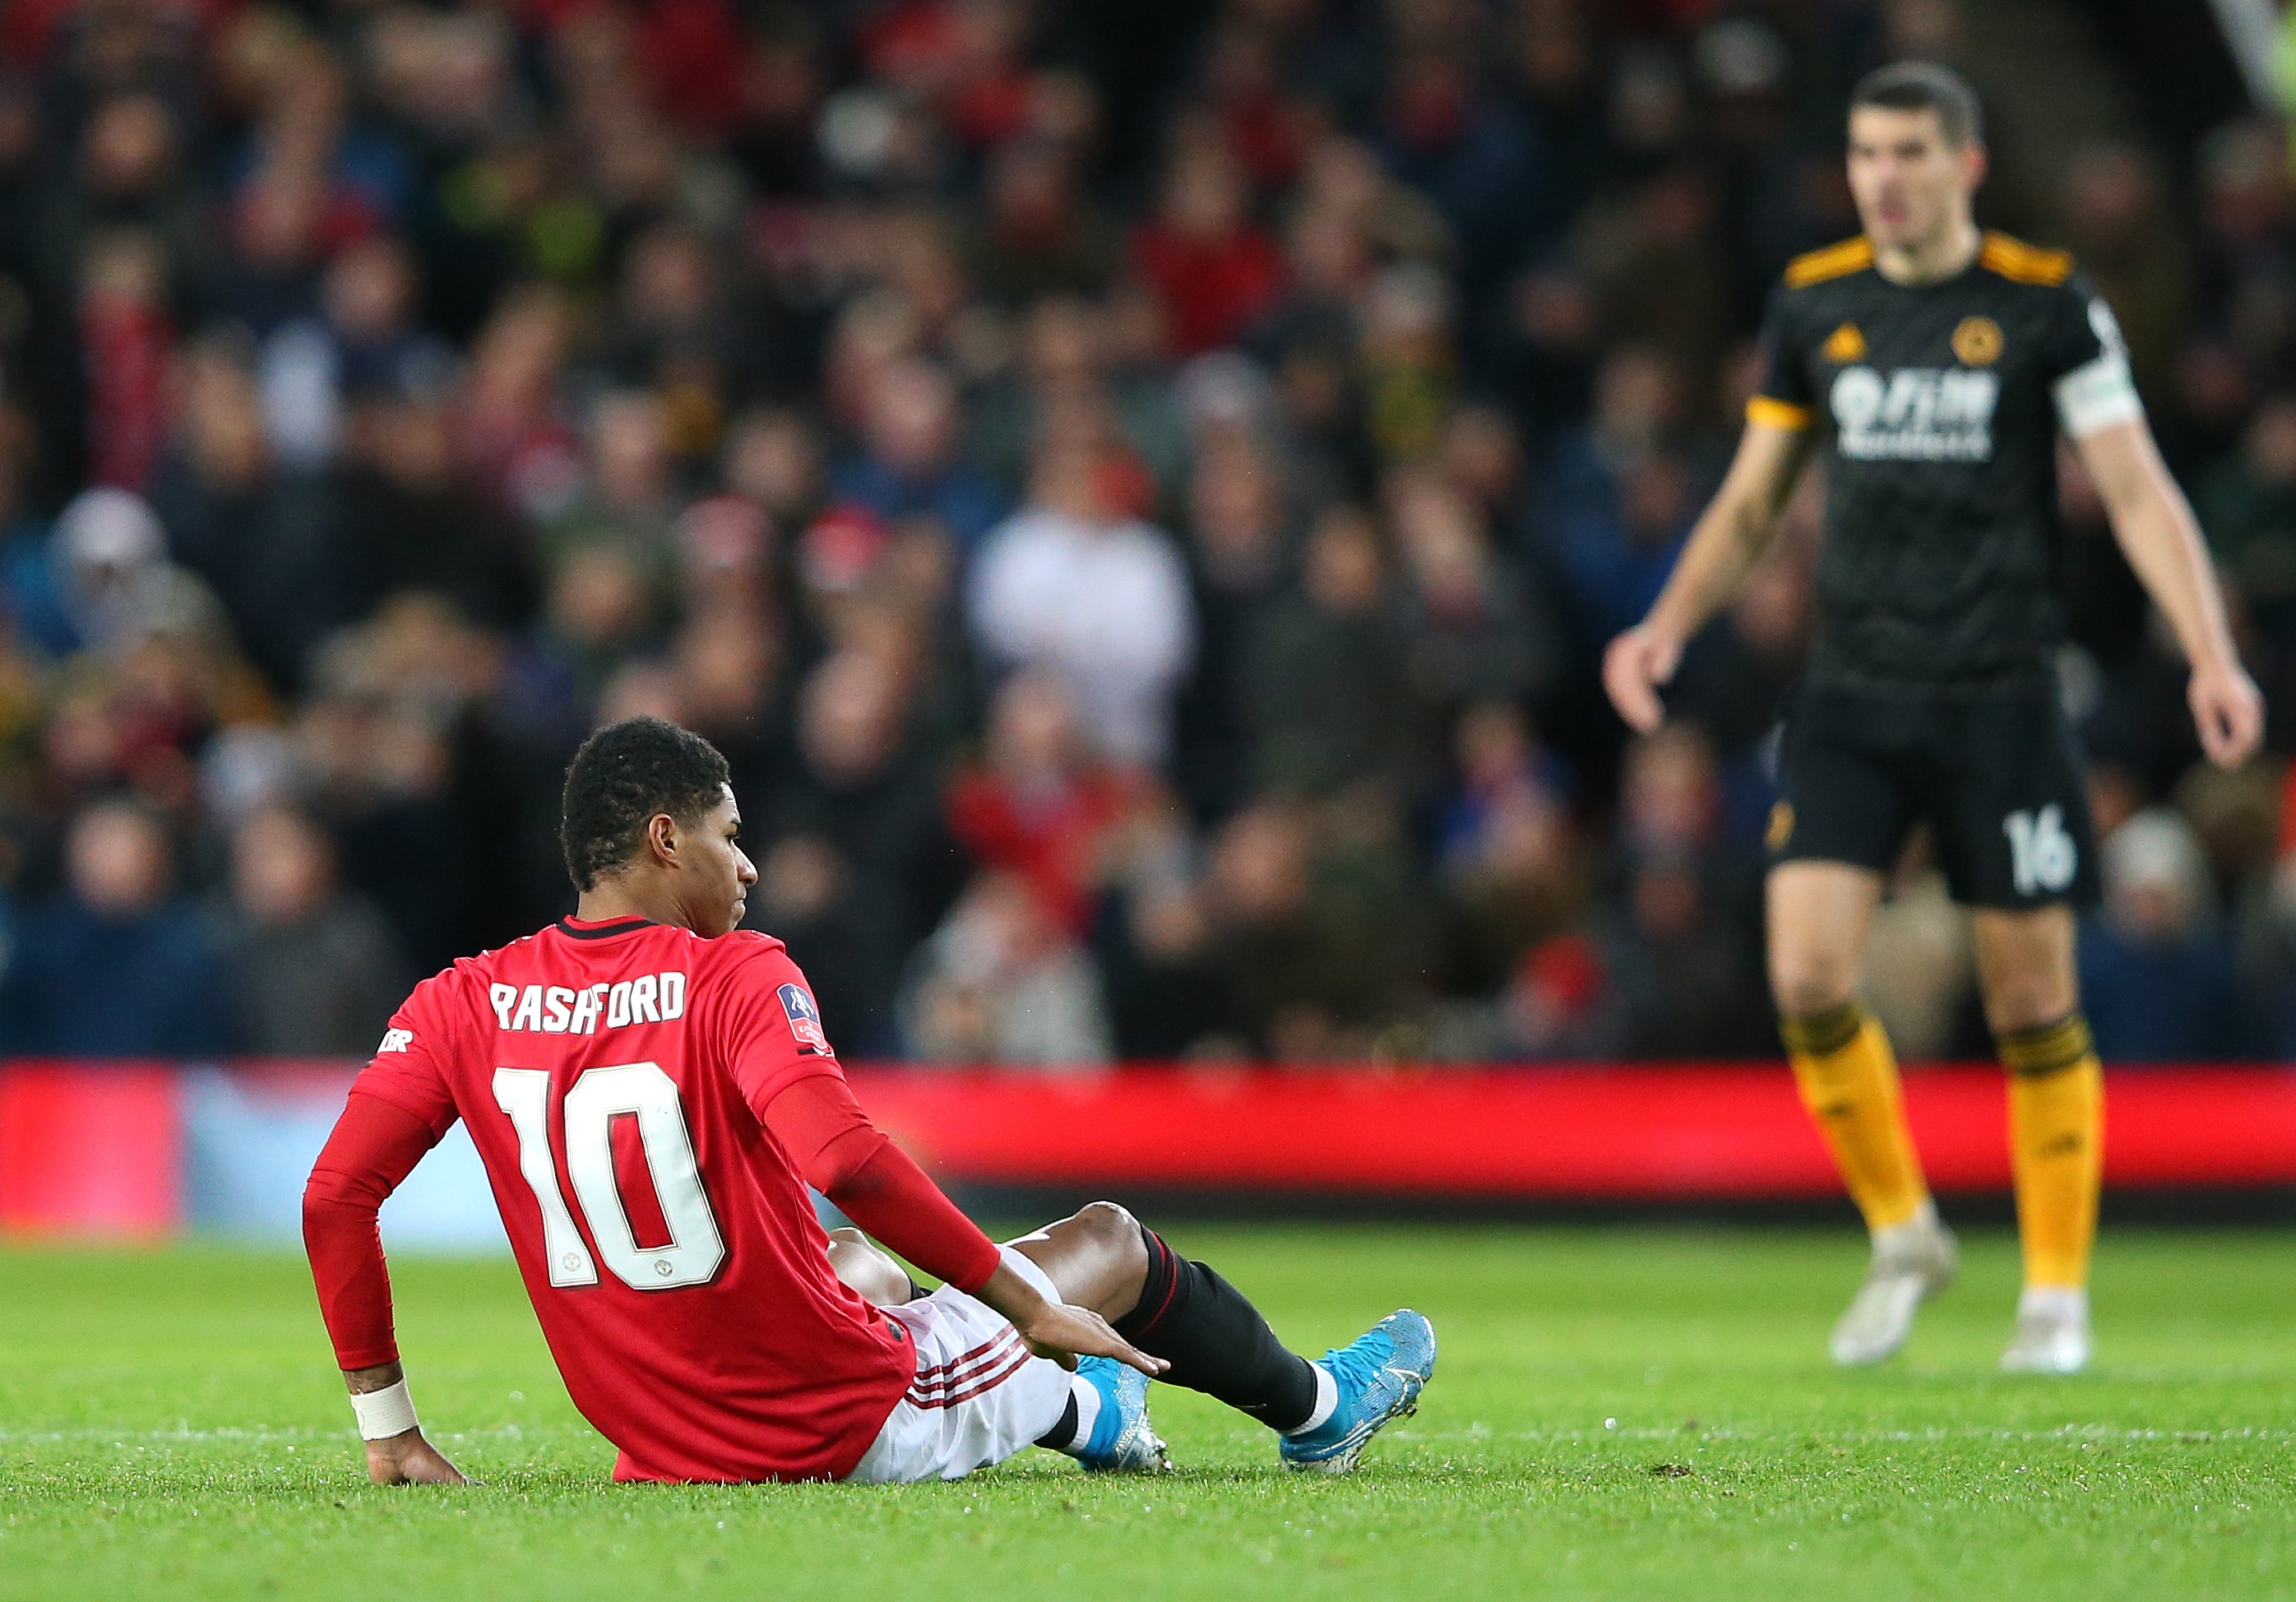 MANCHESTER, ENGLAND - JANUARY 15:  Marcus Rashford of Manchester United lies injured during the FA Cup Third Round Replay match between Manchester United and Wolverhampton Wanderers at Old Trafford on January 15, 2020 in Manchester, England. (Photo by Alex Livesey/Getty Images)